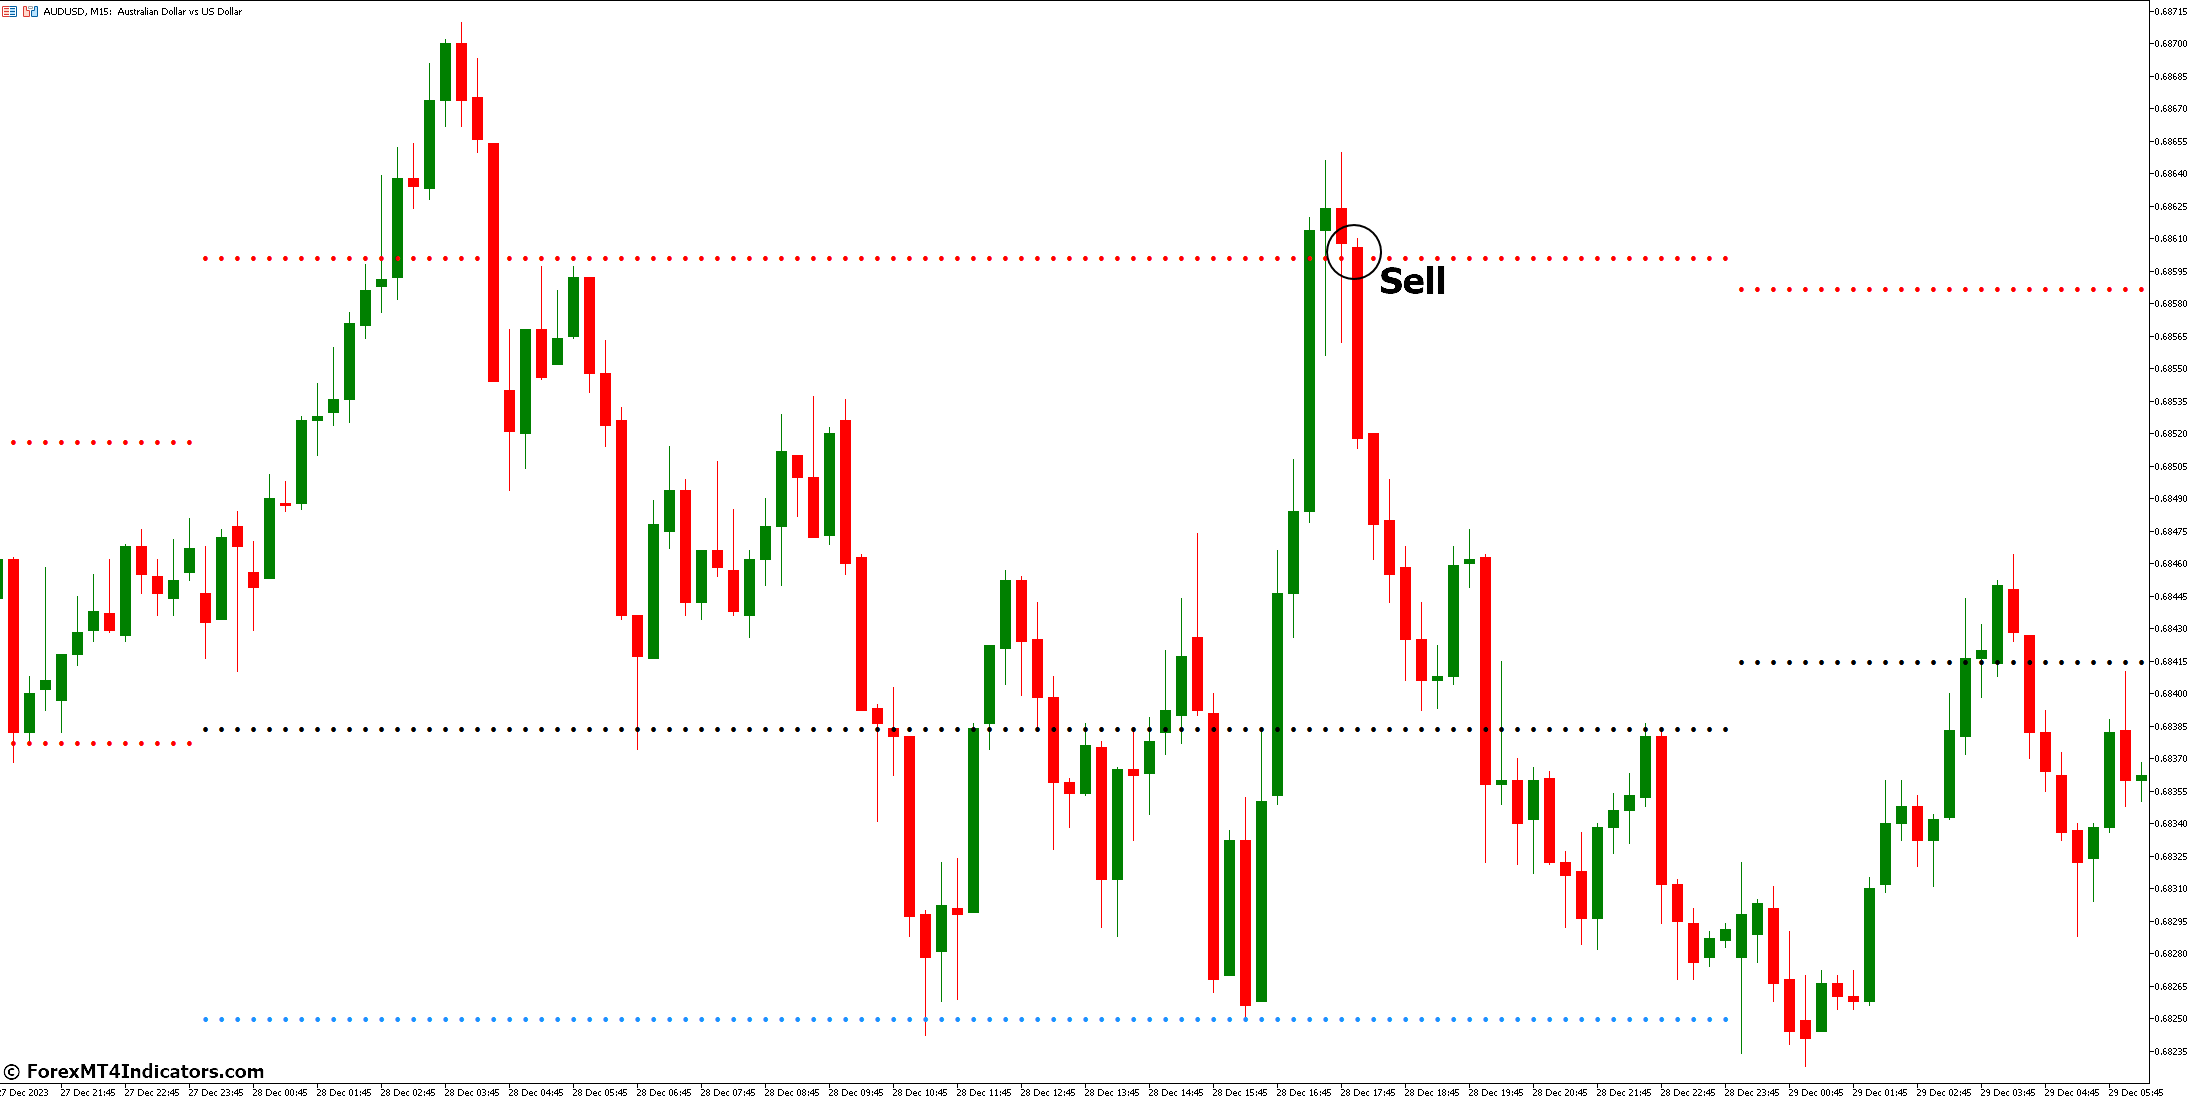 How to Trade with Pivot Point Indicator - Sell Entry